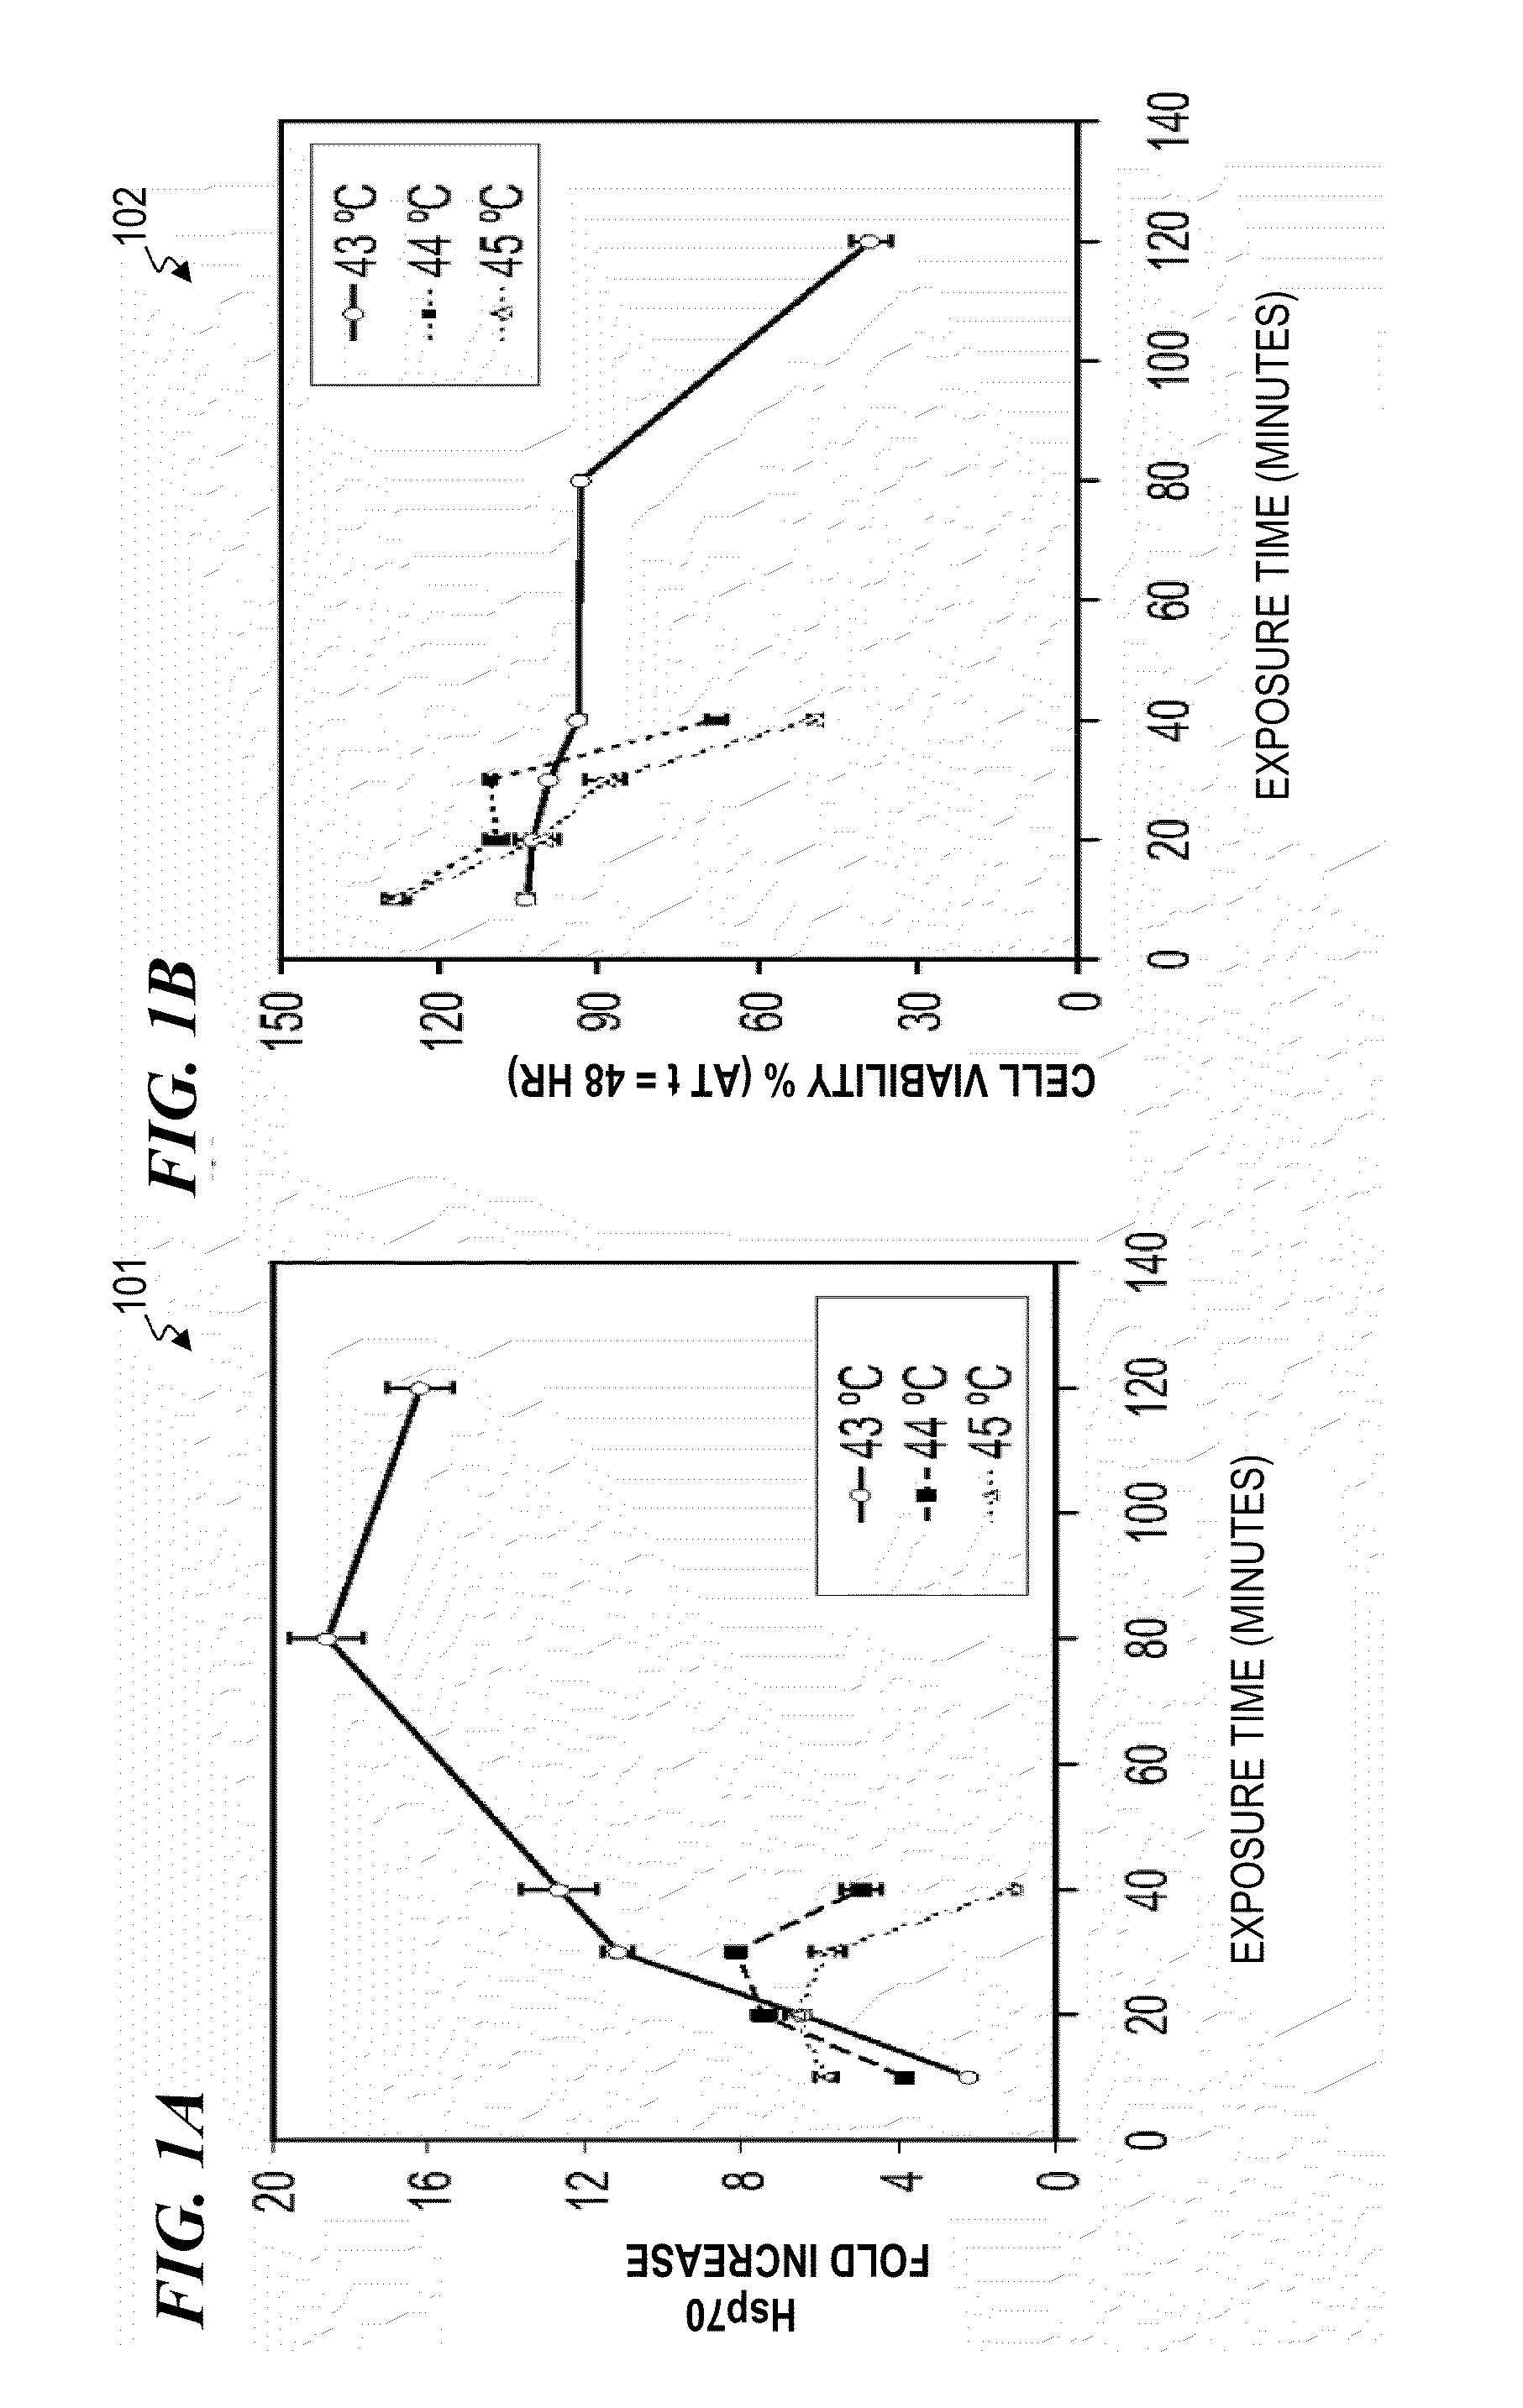 System and method for conditioning animal tissue using laser light